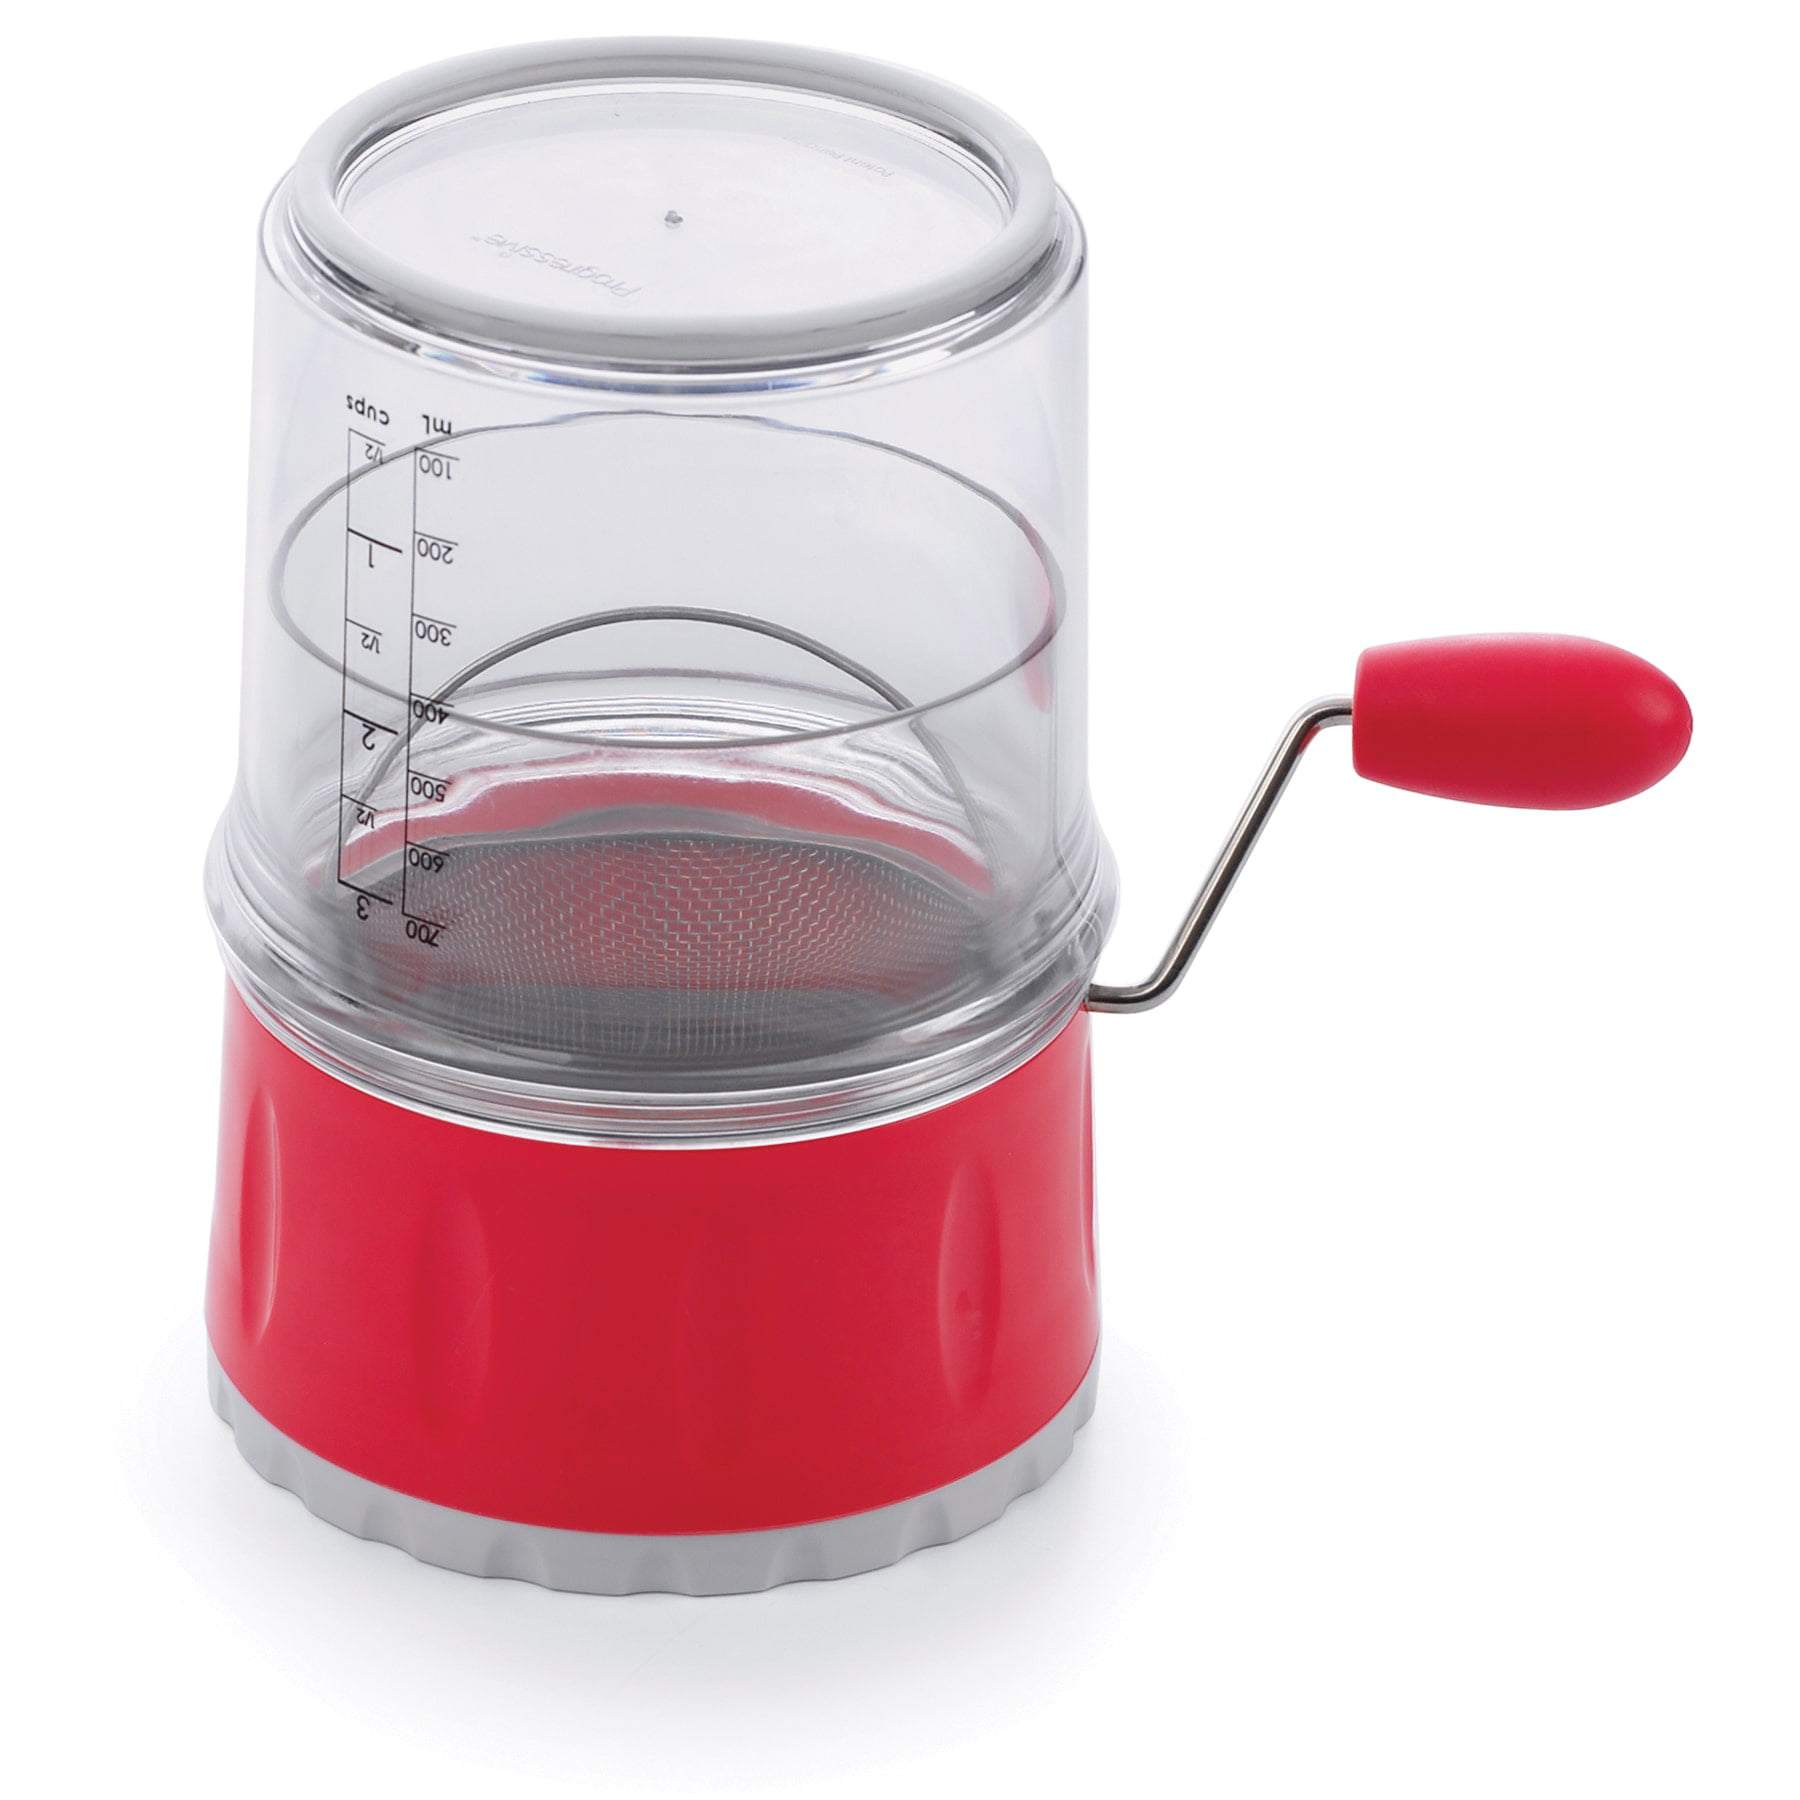 QUICK SIFTER - MEASURING FLOUR SIFTER-PRO-GFS-2